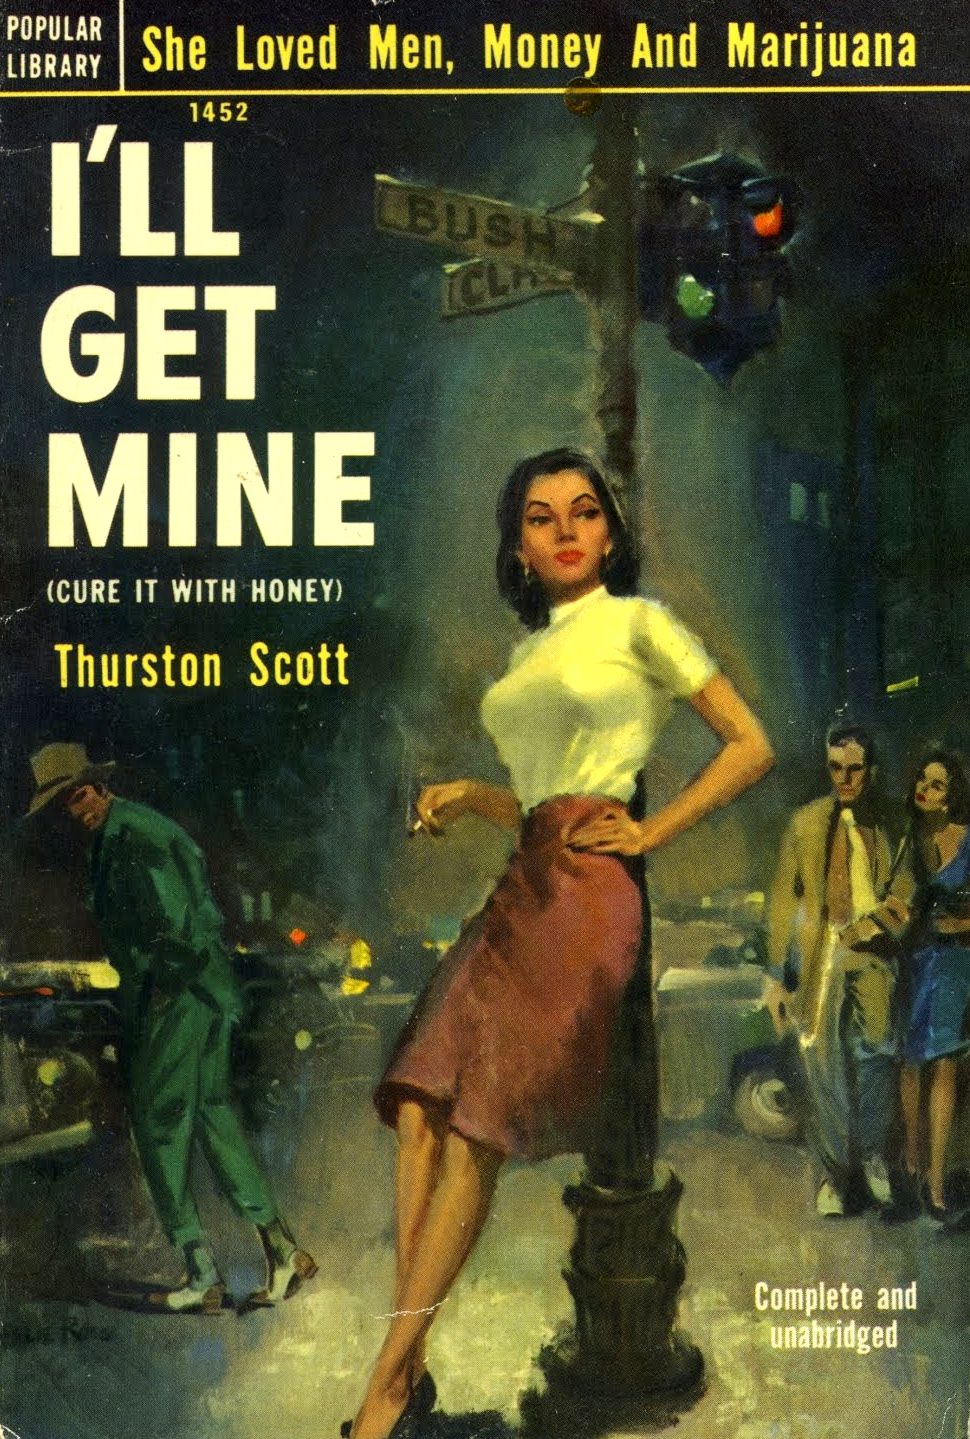 ‘i Ll Get Mine Here Are 13 Vintage Pulp Book Covers That Depict ‘loose Women Getting High